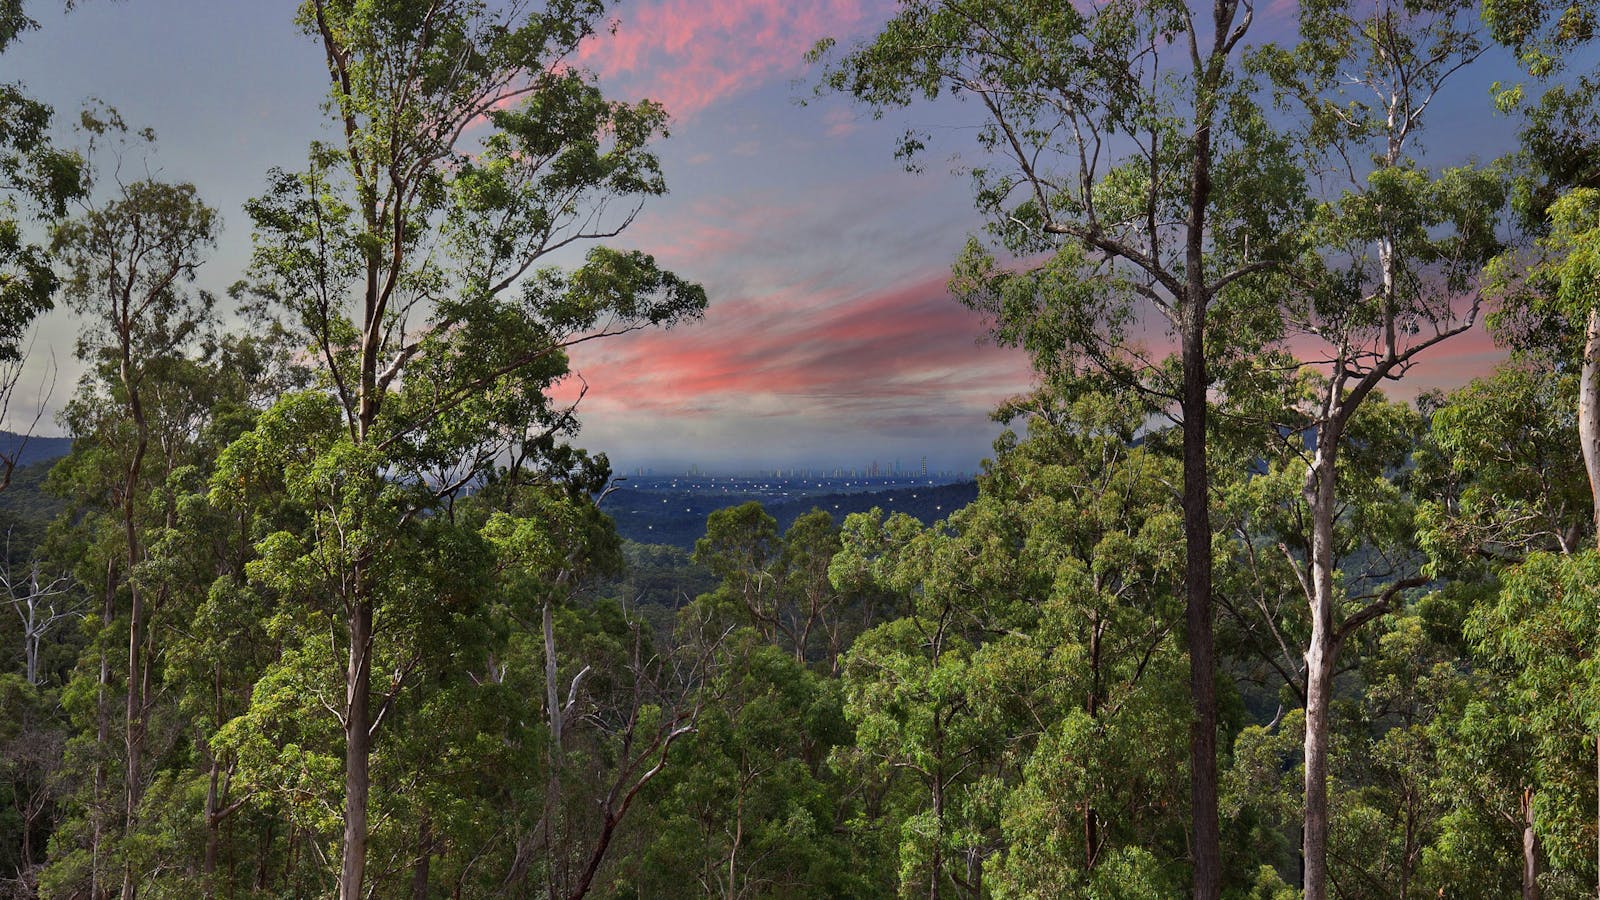 Amazing private views over looking the Austinville valley towards the Gold Coast city and water